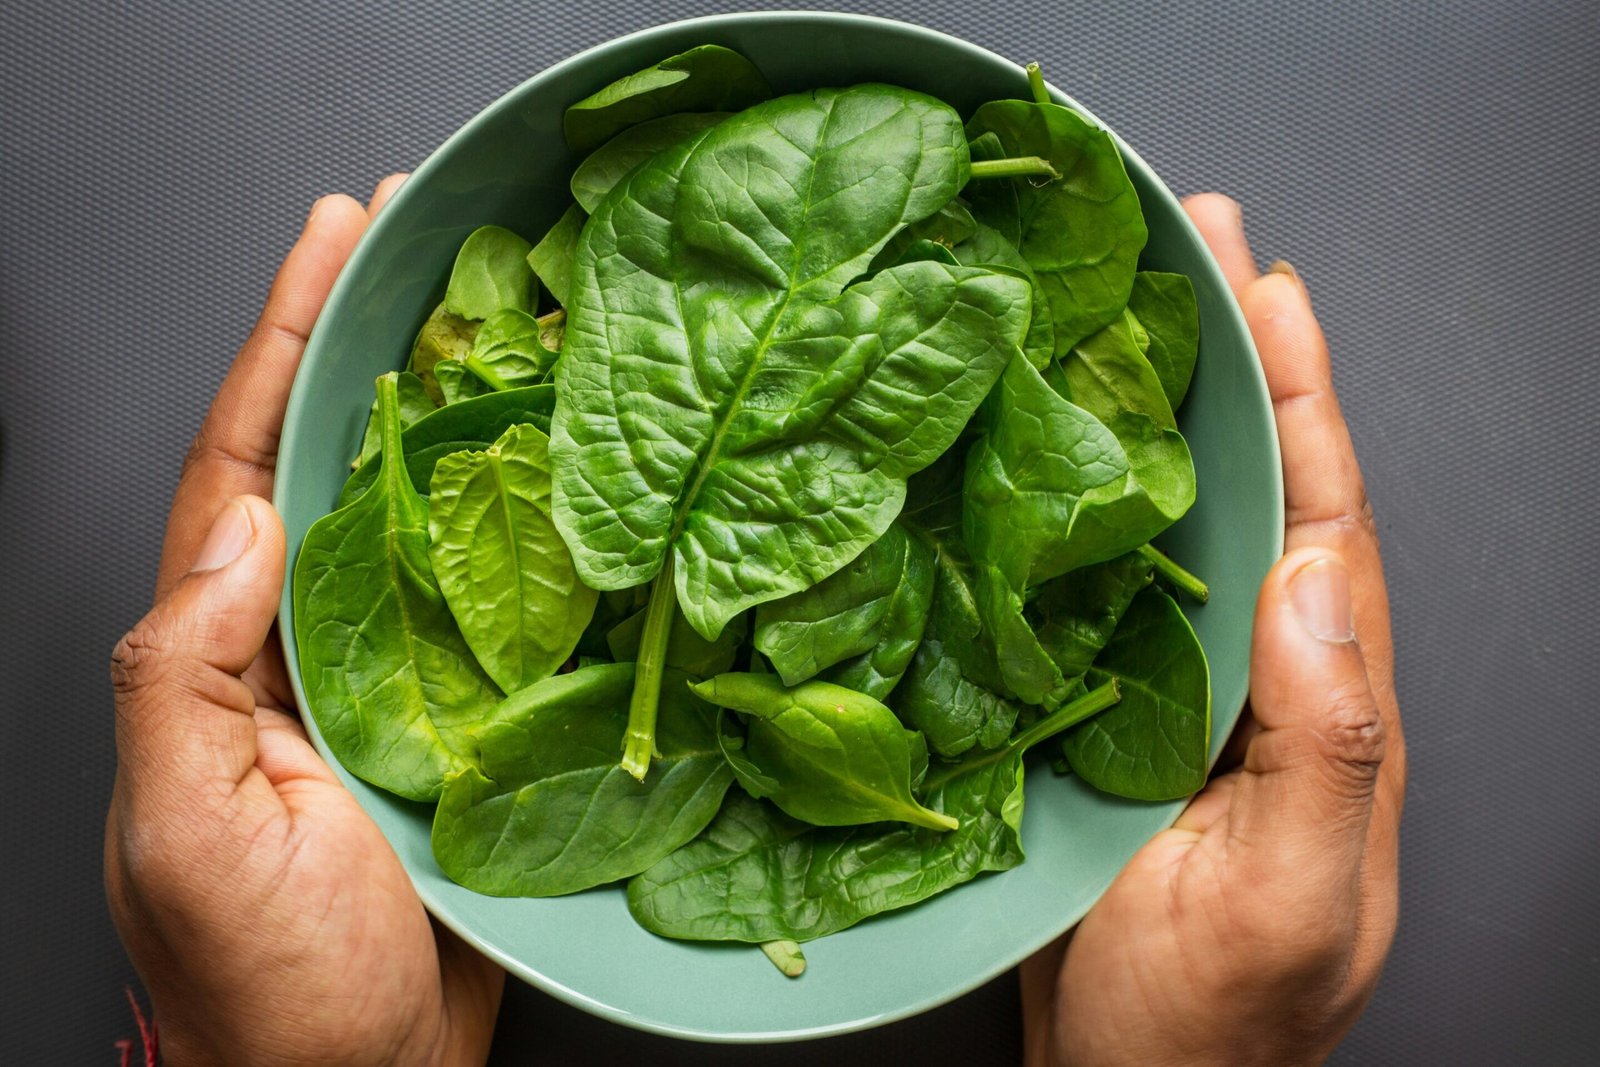 Among leafy green powerhouses spinach packs a wallop